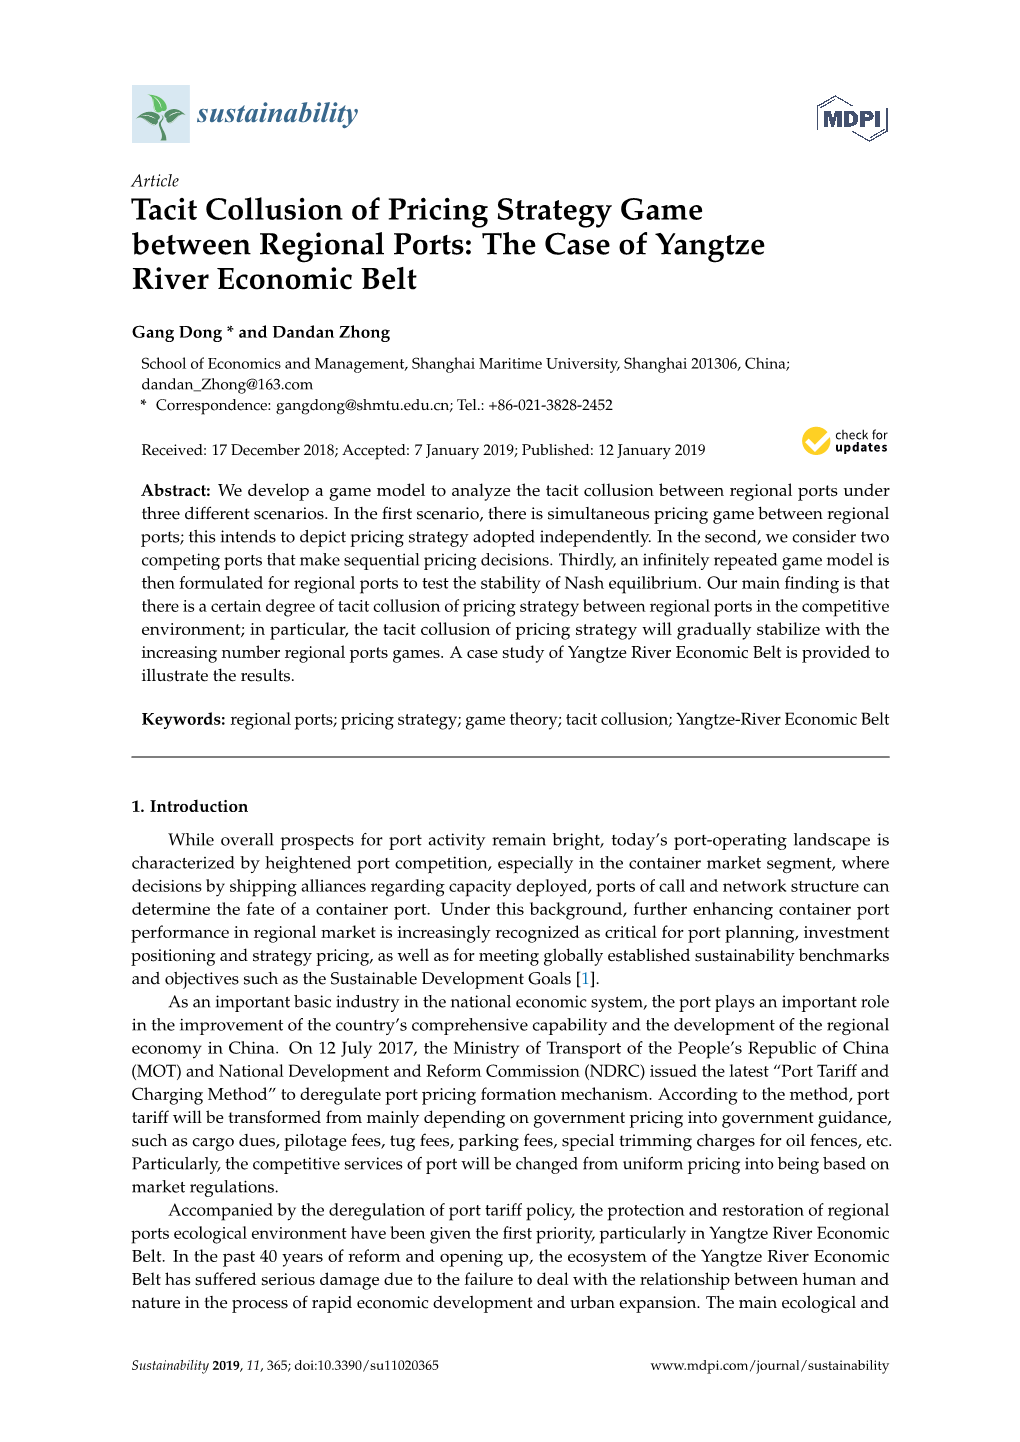 Tacit Collusion of Pricing Strategy Game Between Regional Ports: the Case of Yangtze River Economic Belt